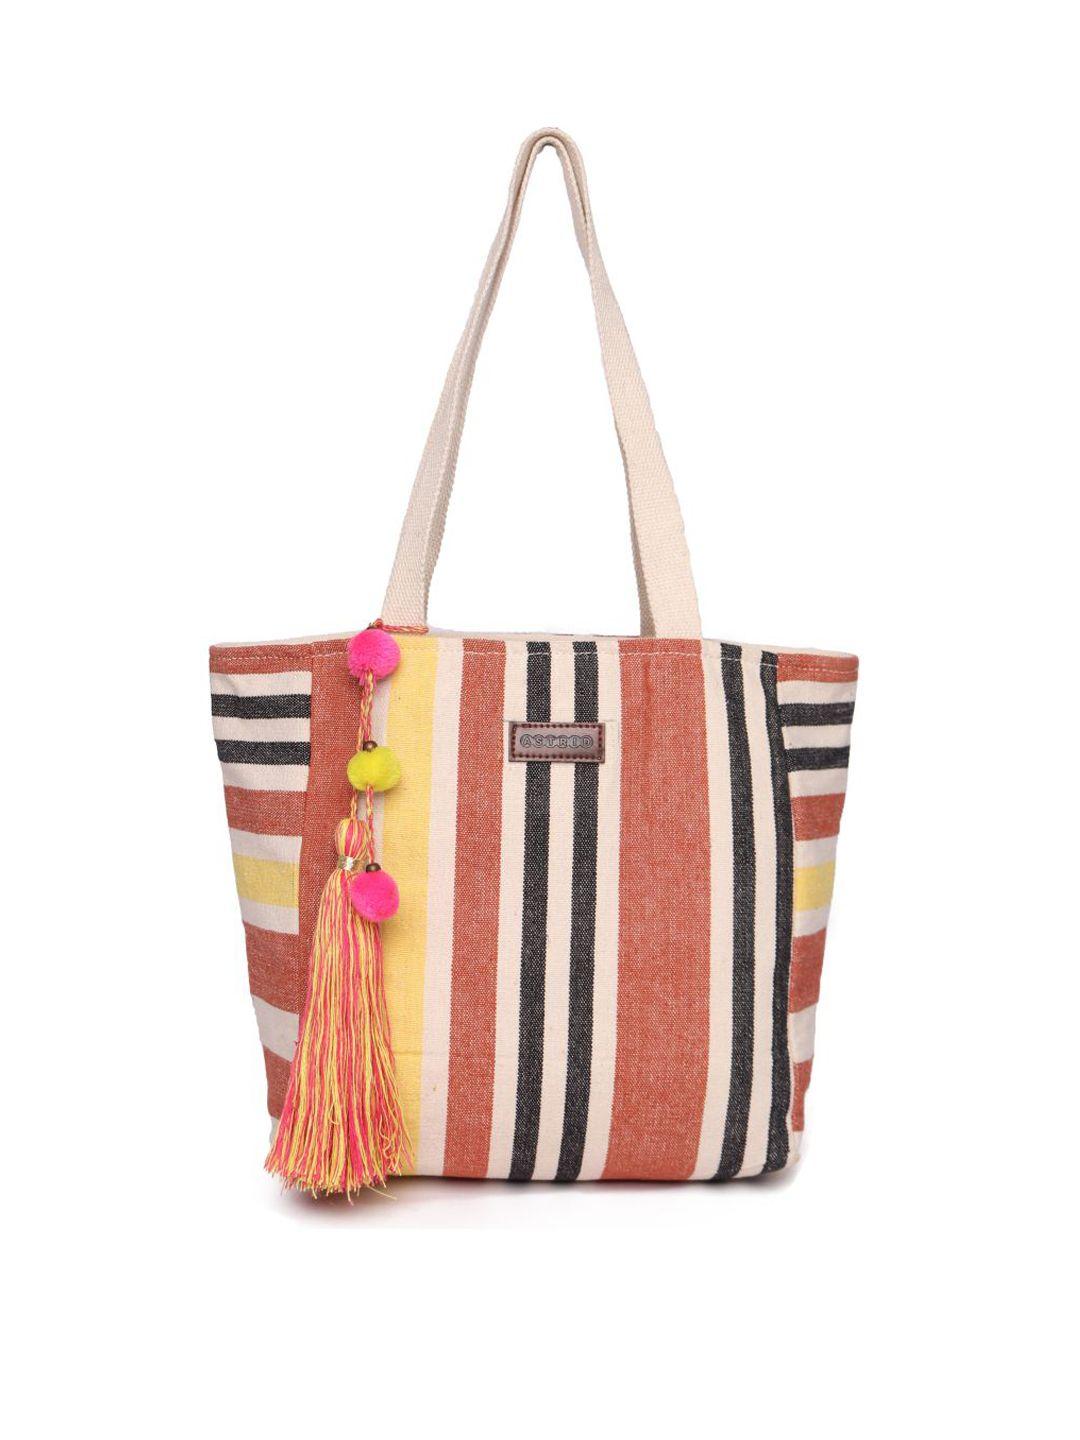 astrid striped oversized shopper tote bag with tasselled